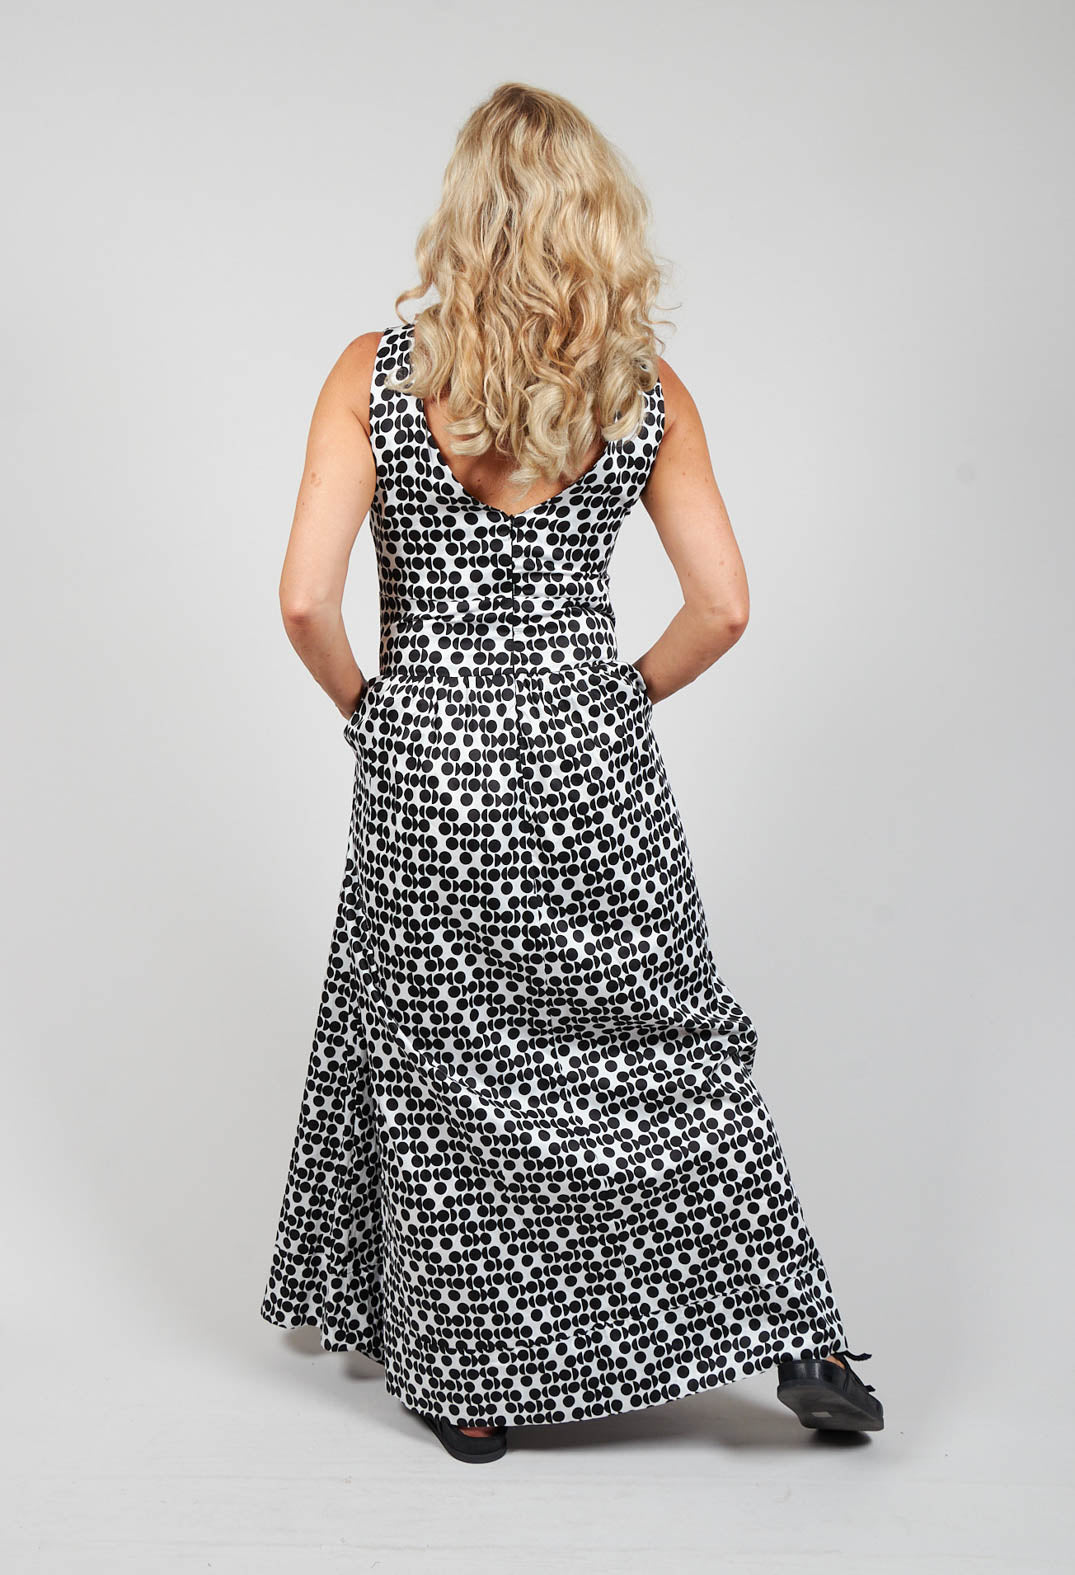 lady wearing a v neck maxi dress with black spots printed